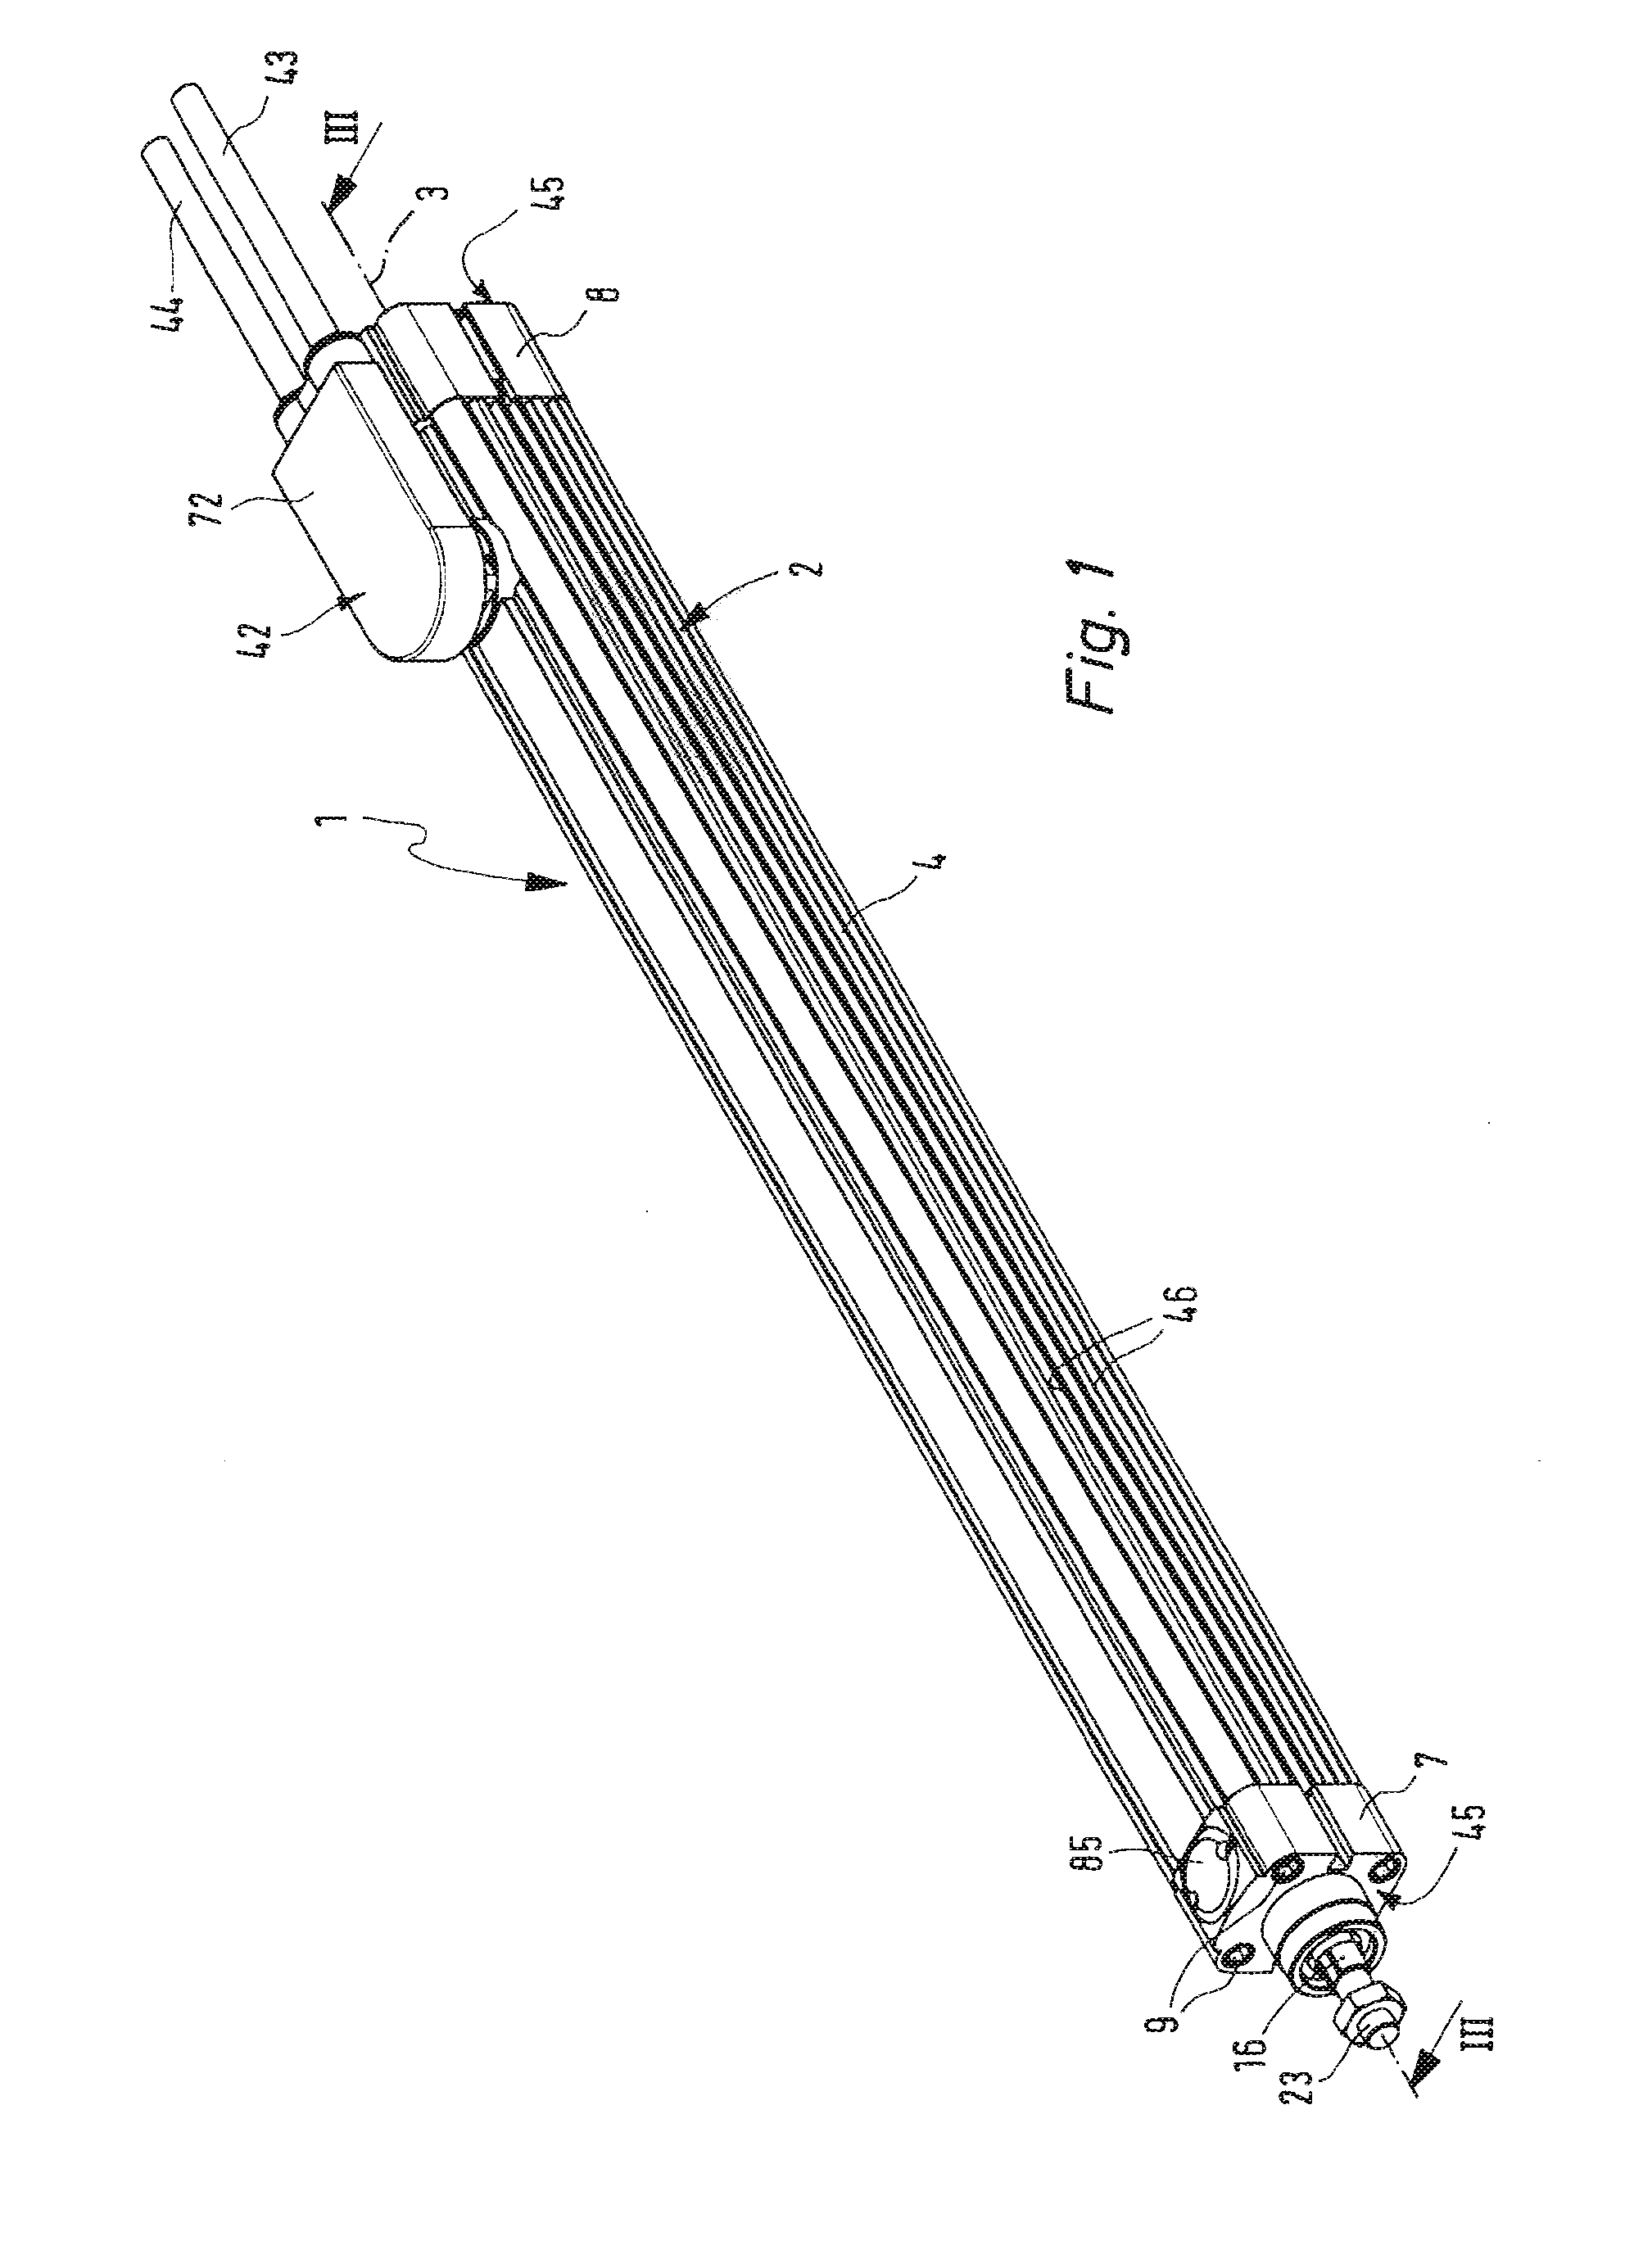 Electrical Linear Drive